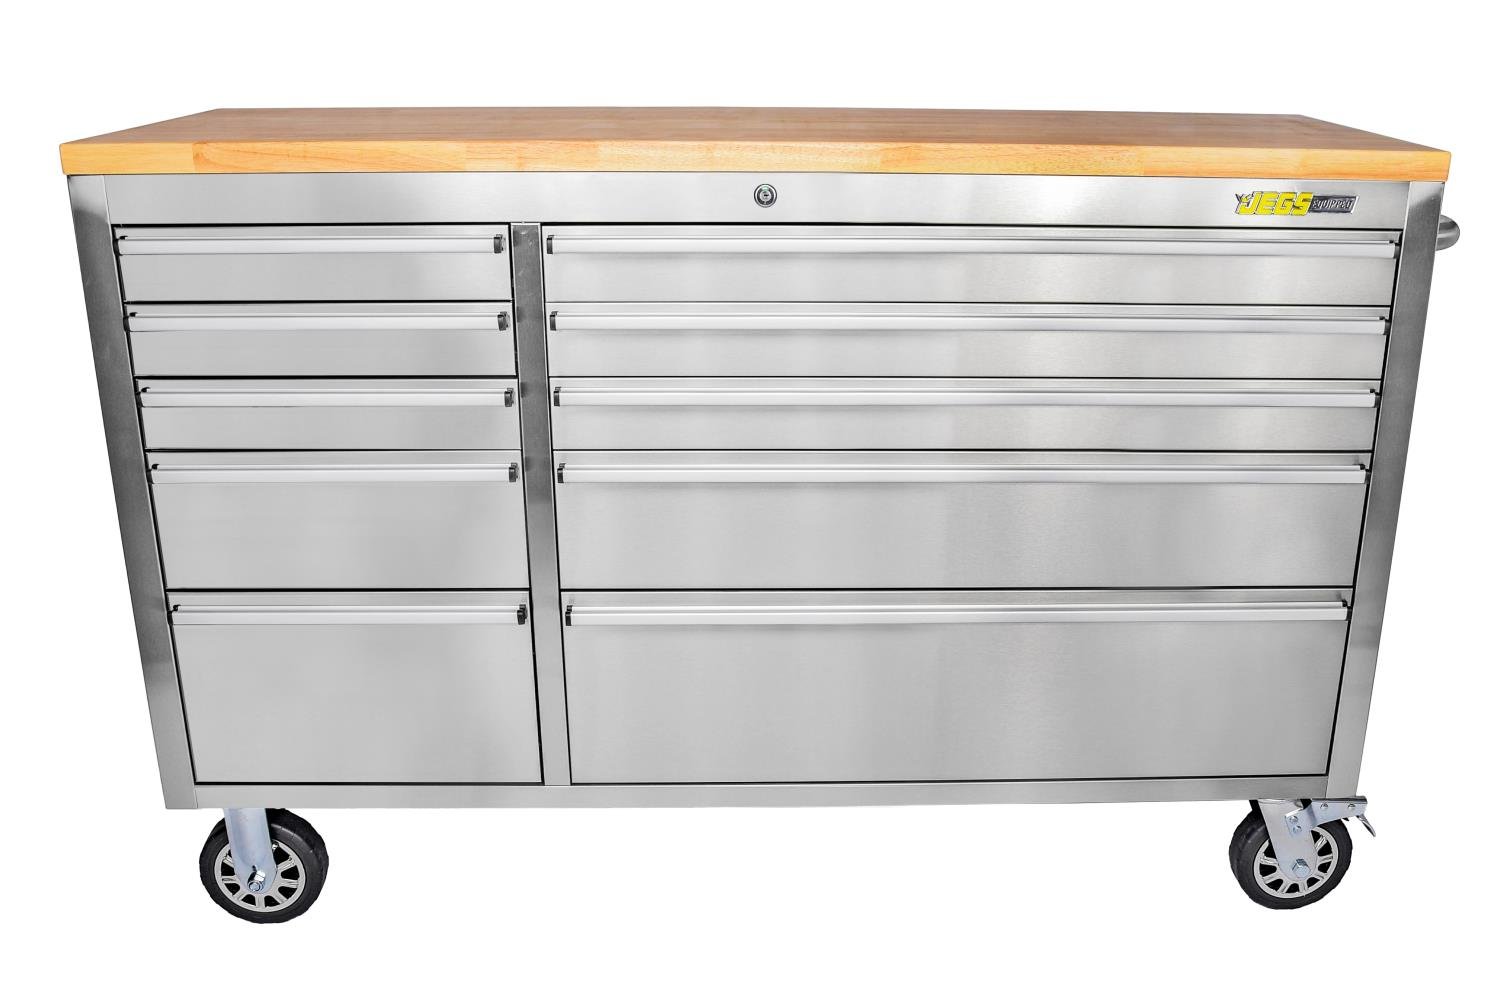 JEGS 555-81446: 55 in. Tool Cabinet | Anti-Fingerprint Stainless Steel |  Includes (10) Lockable Drawers with Ball Bearing Soft-Close Slides,  Composite Wood Butcher Block Top, (4) 110v Outlets, (2) USB Ports, (4) 6  in. Casters (2) Locking - JEGS